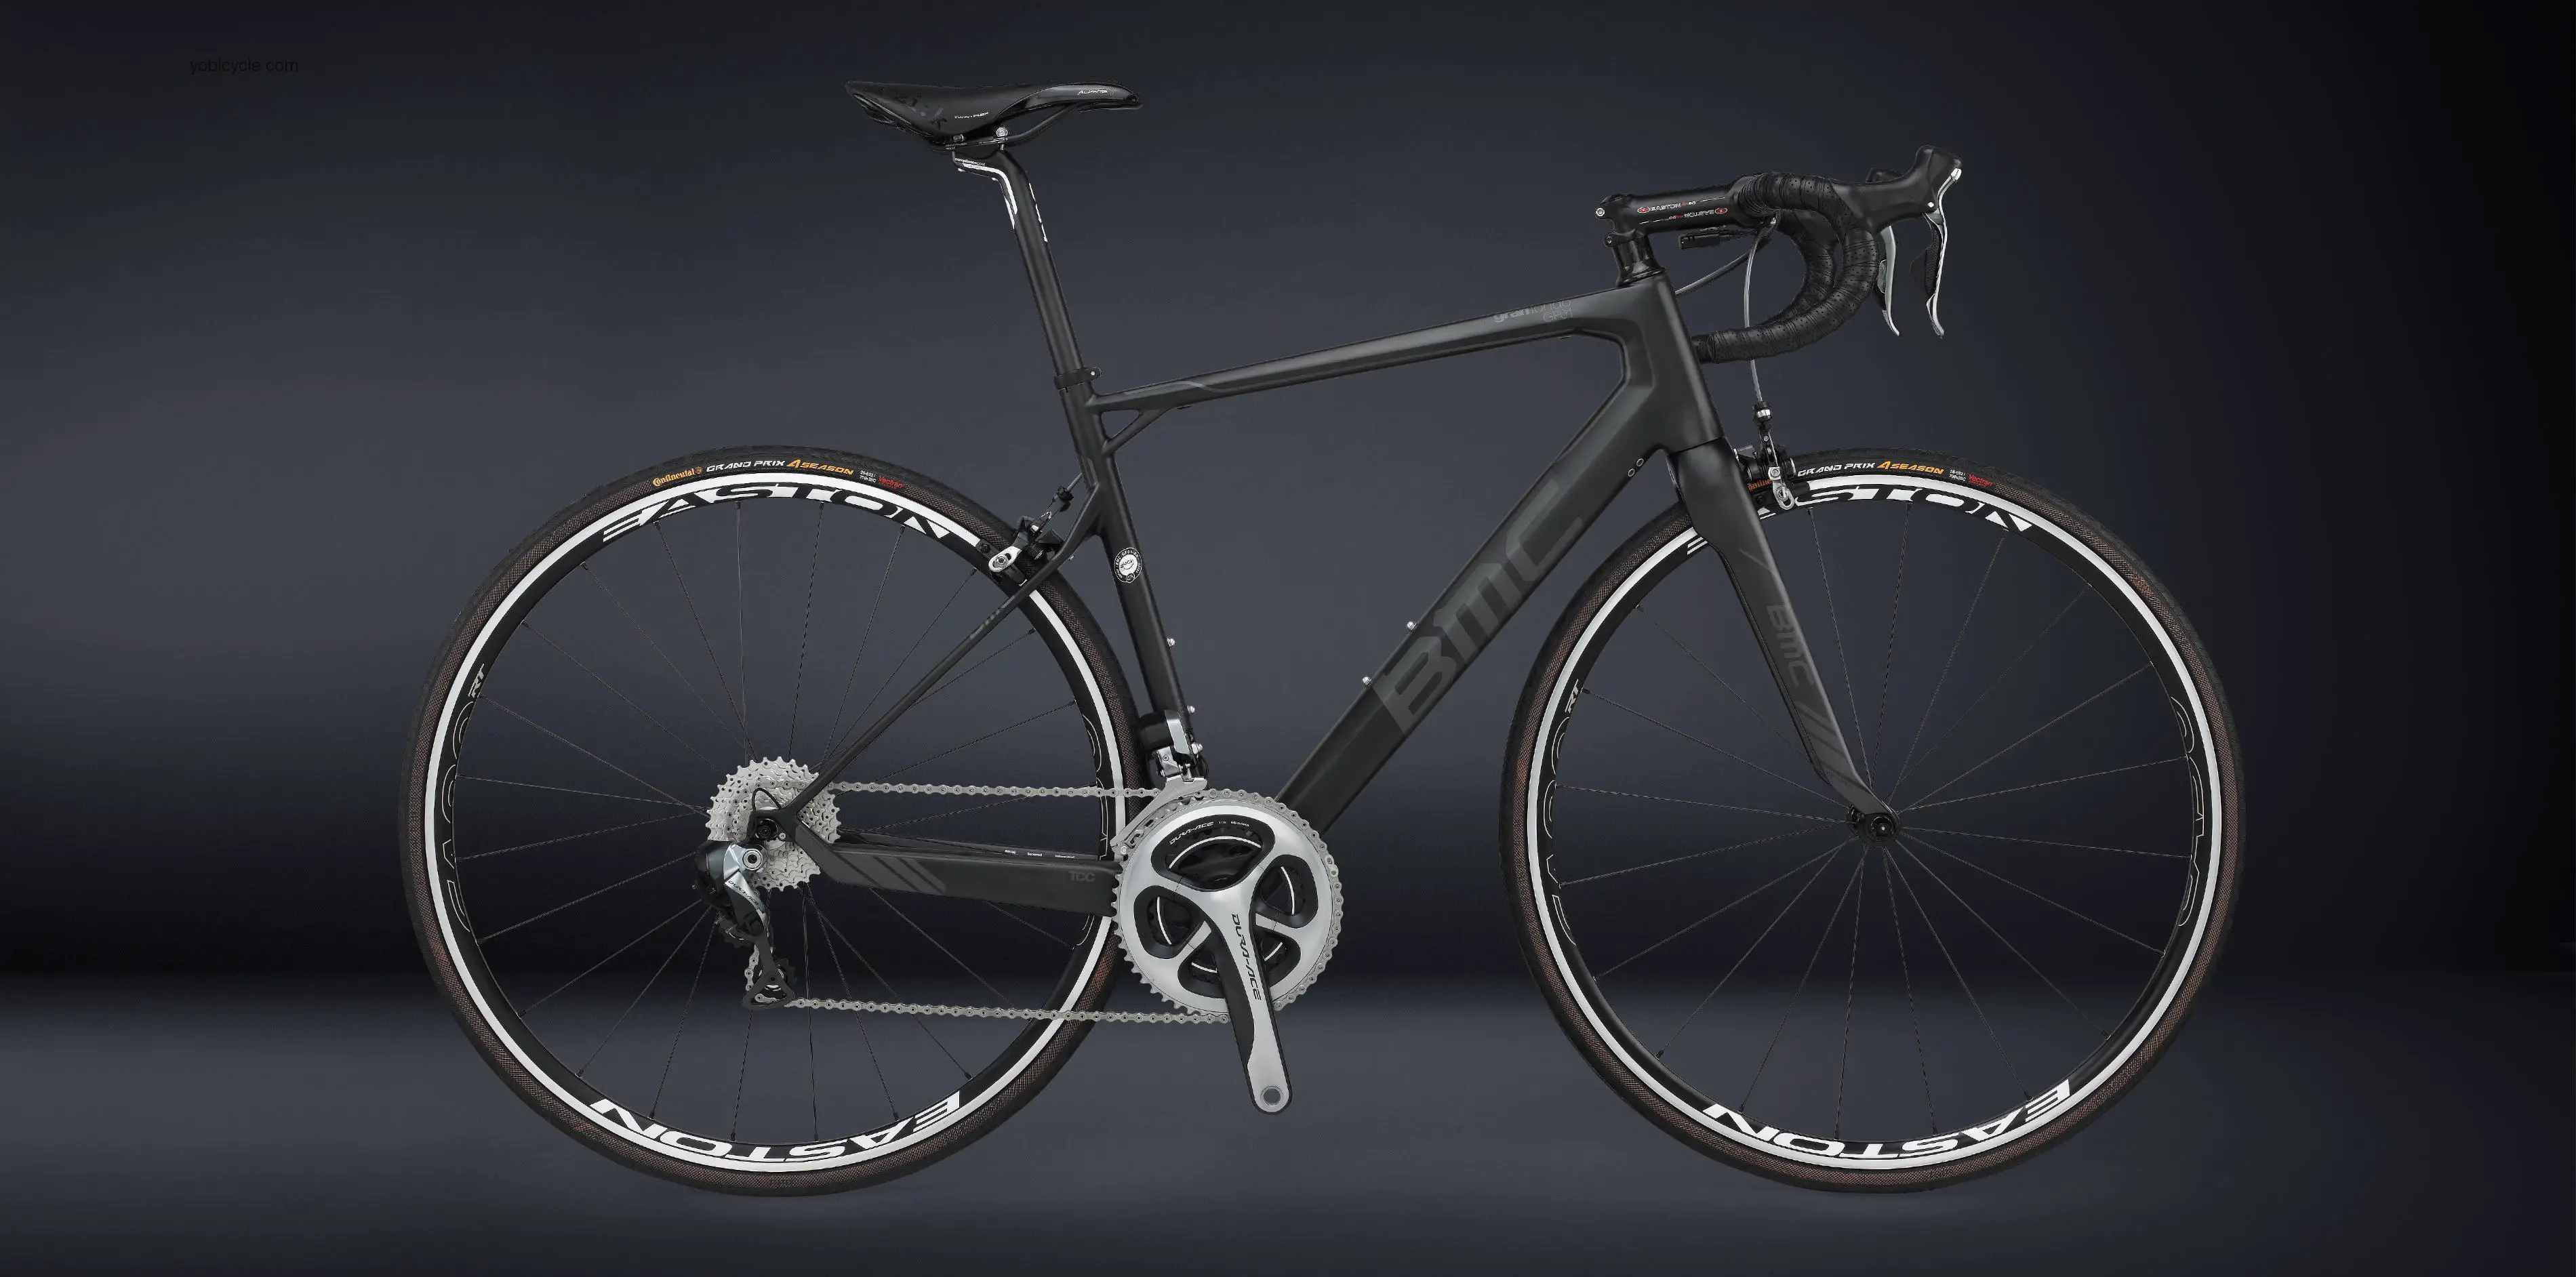 BMC GF01 Dura Ace Di2 competitors and comparison tool online specs and performance